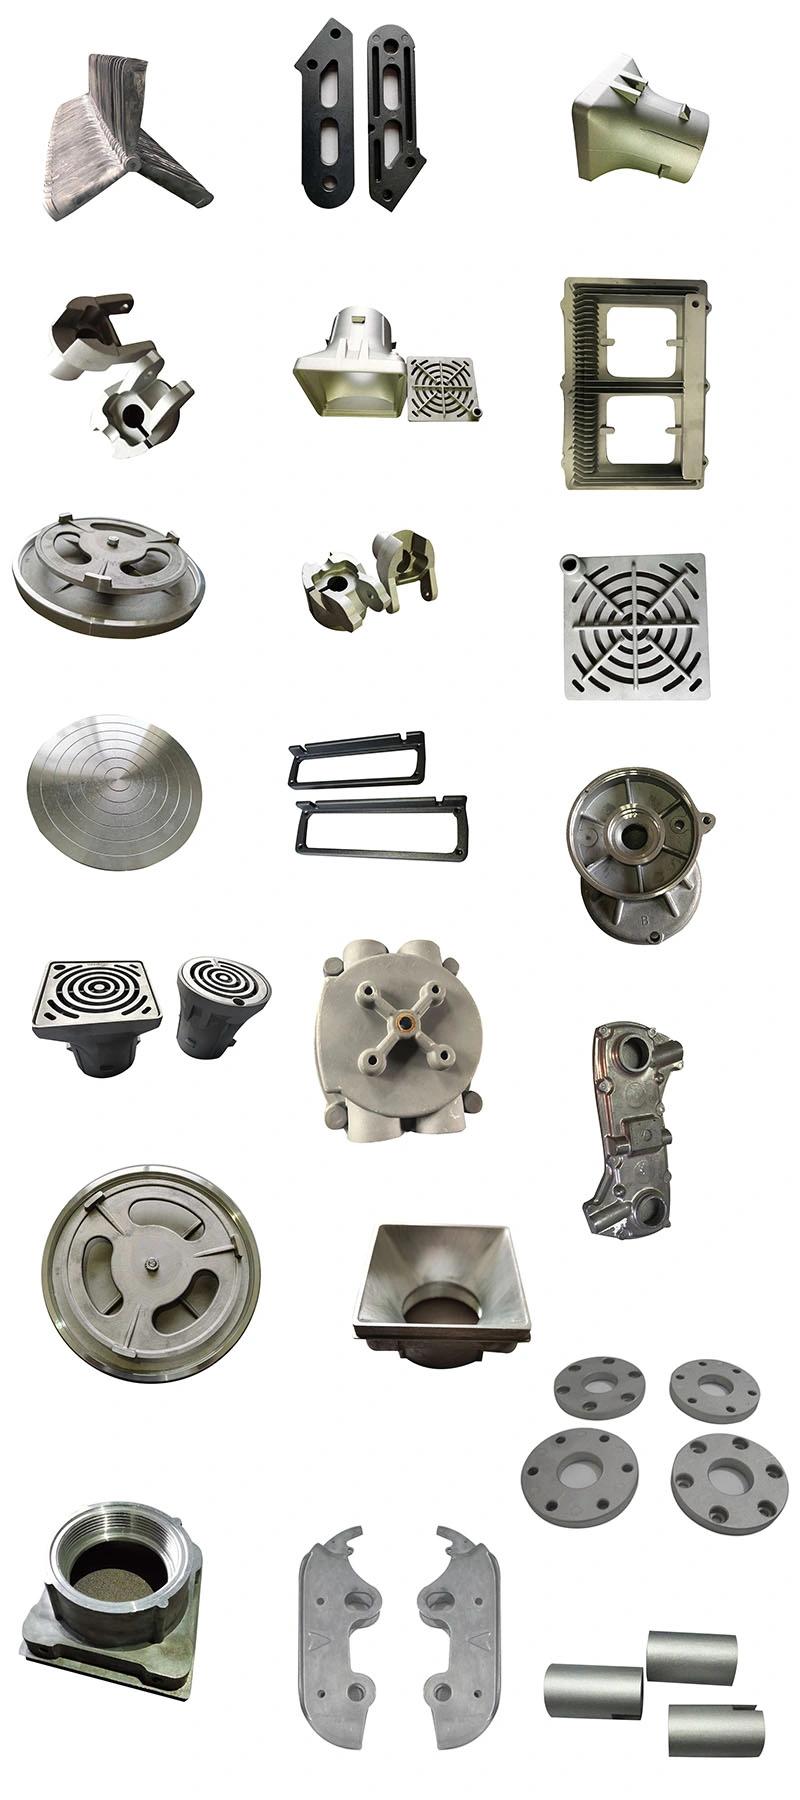 OEM Die Casting Parts in Aluminum with Powder Coated